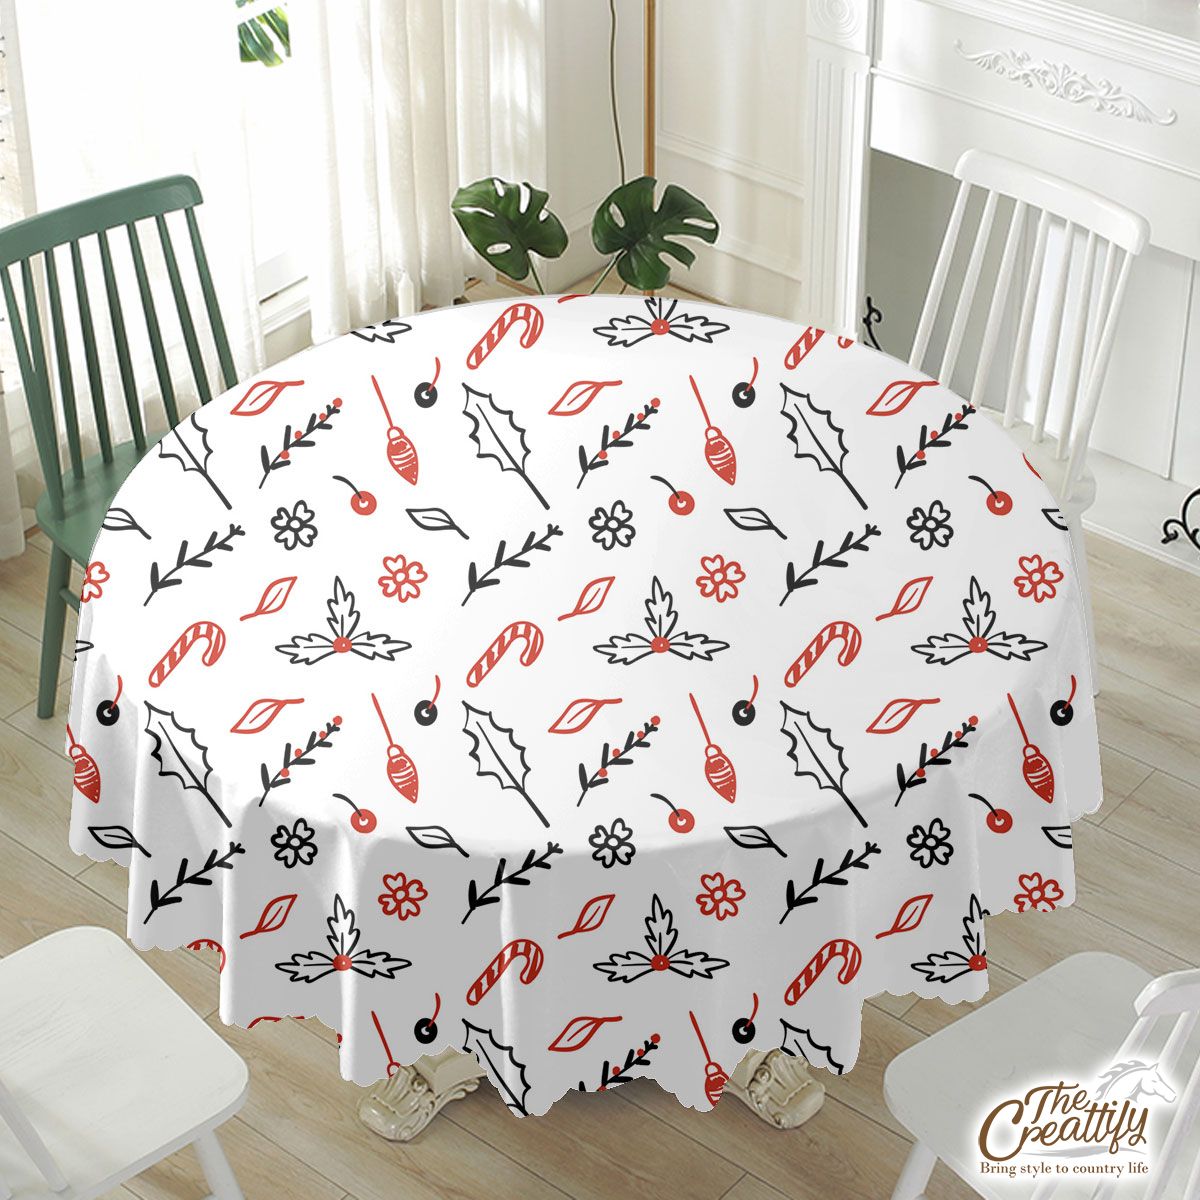 Christmas Lights, Candy Cane And Holly Tree Waterproof Tablecloth